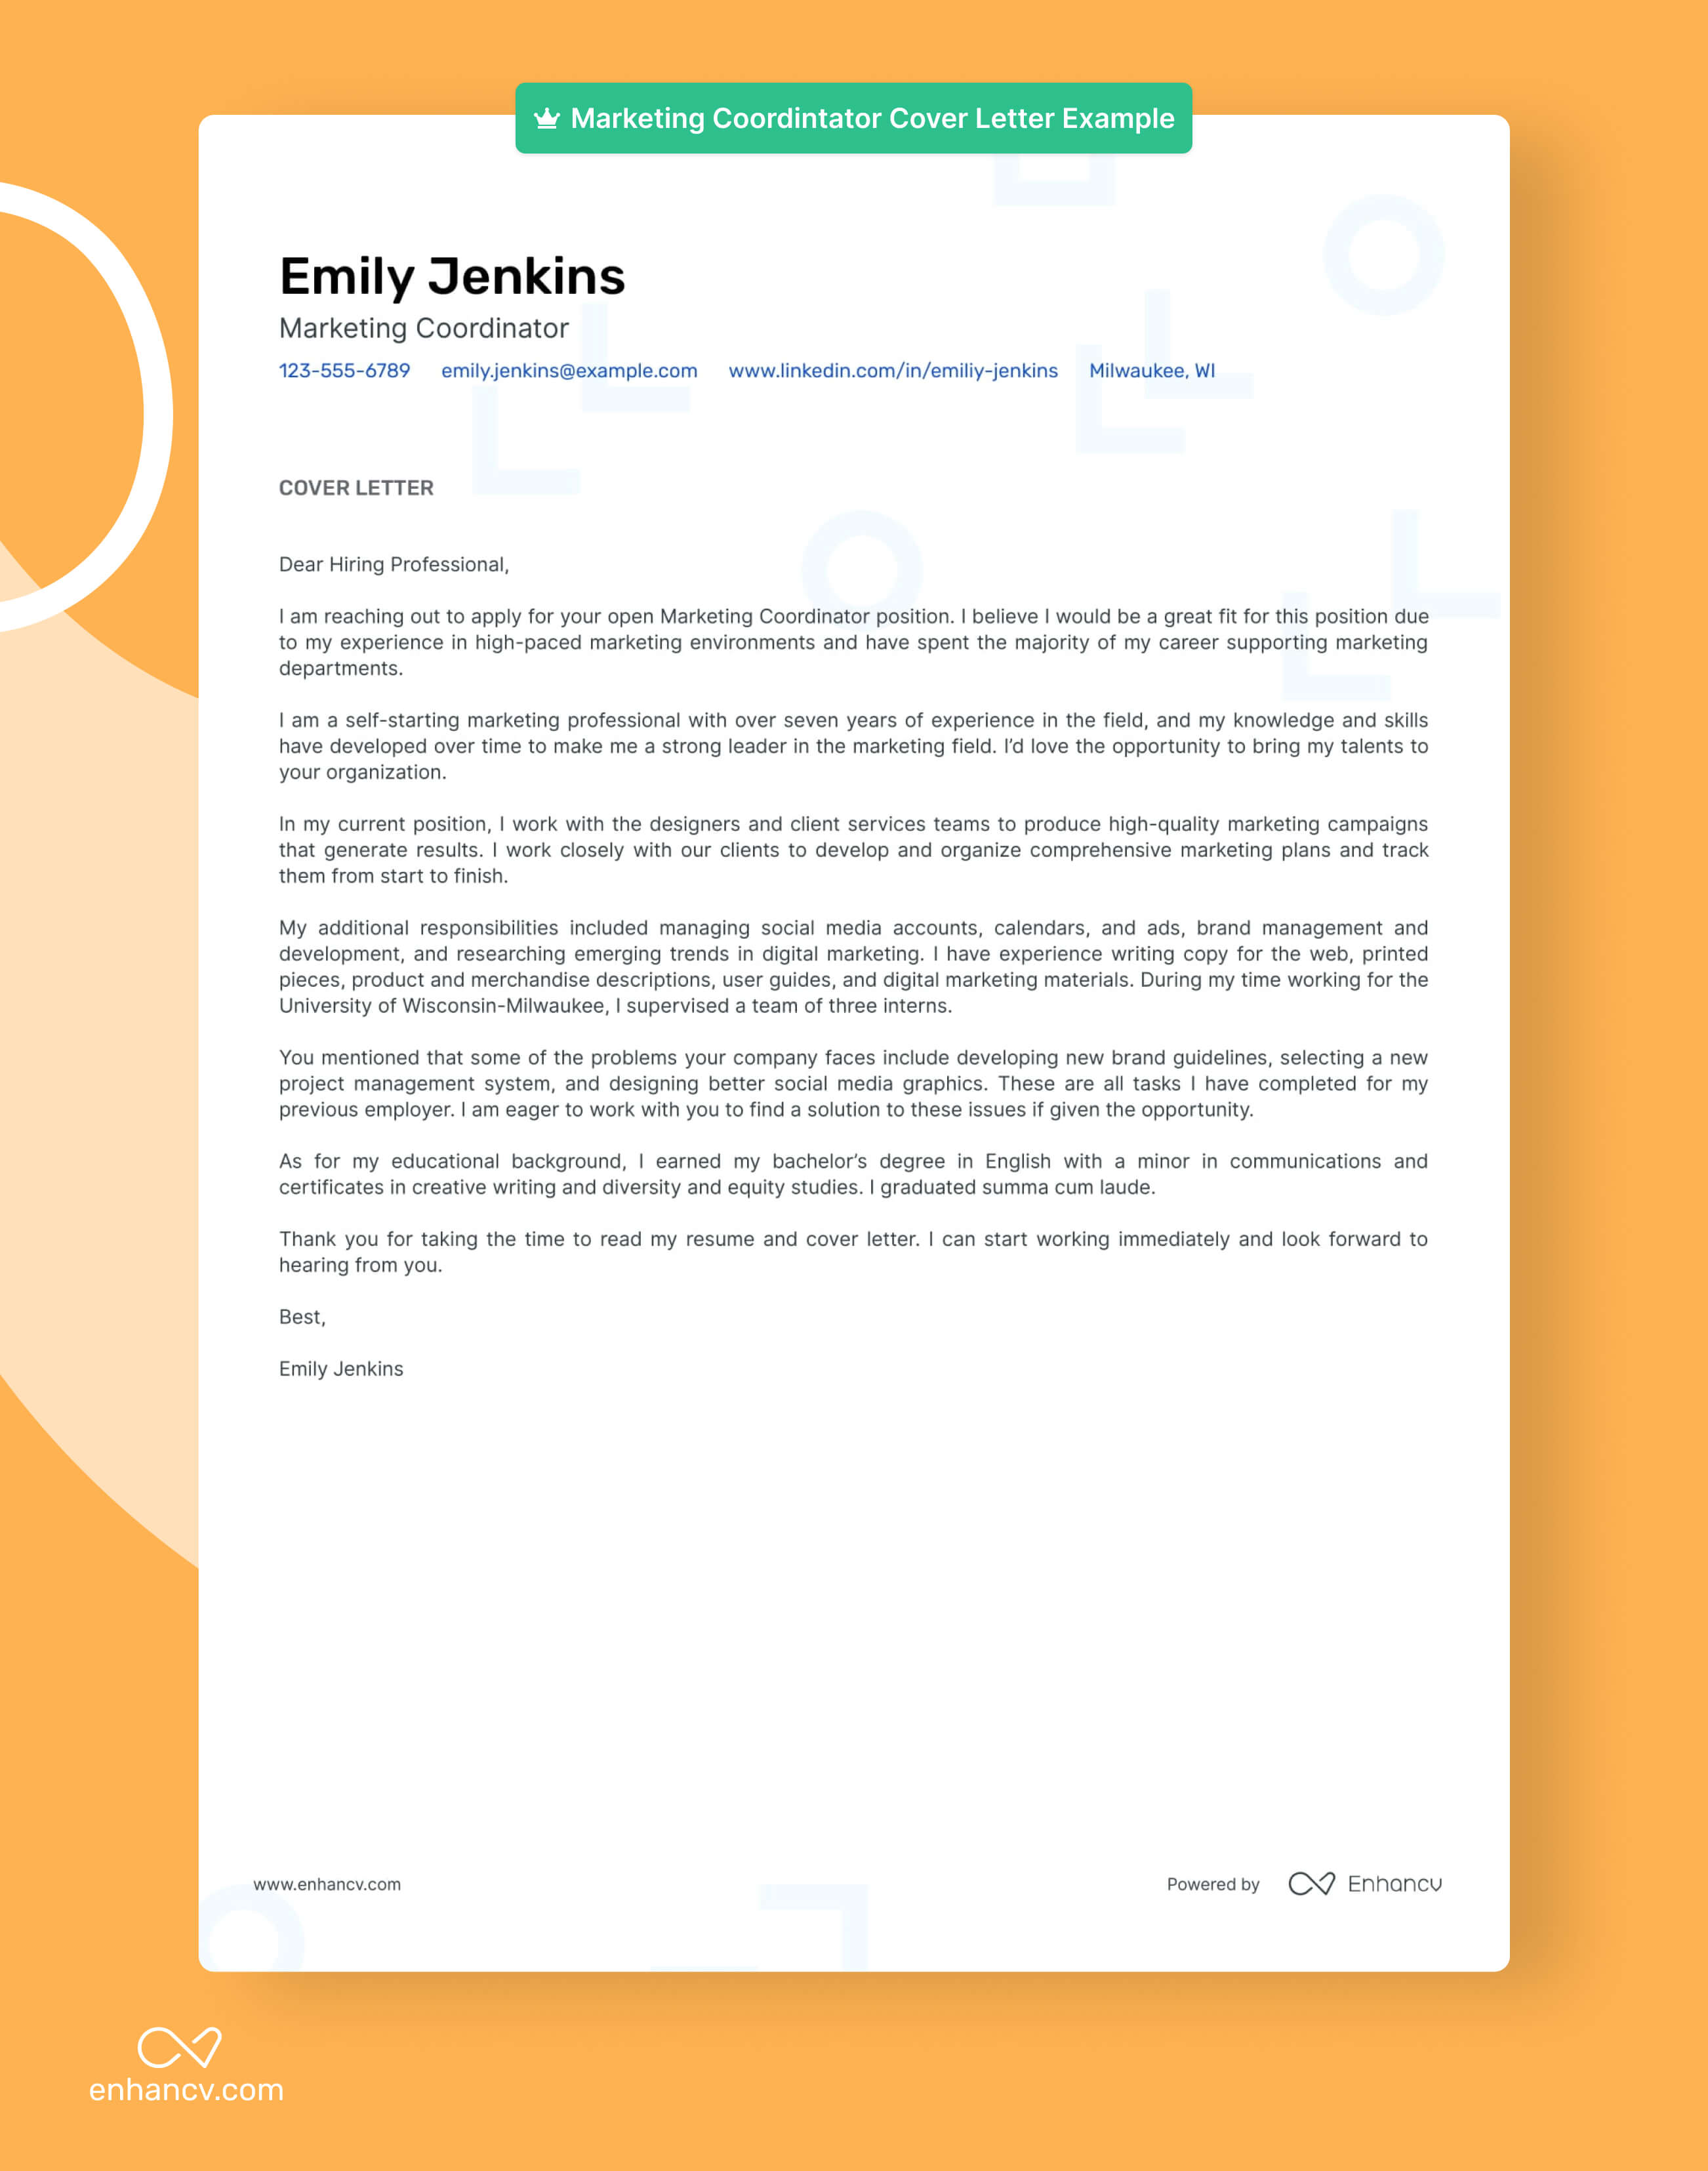 Marketing Coordinator Cover Letter Example Built With Enhancv